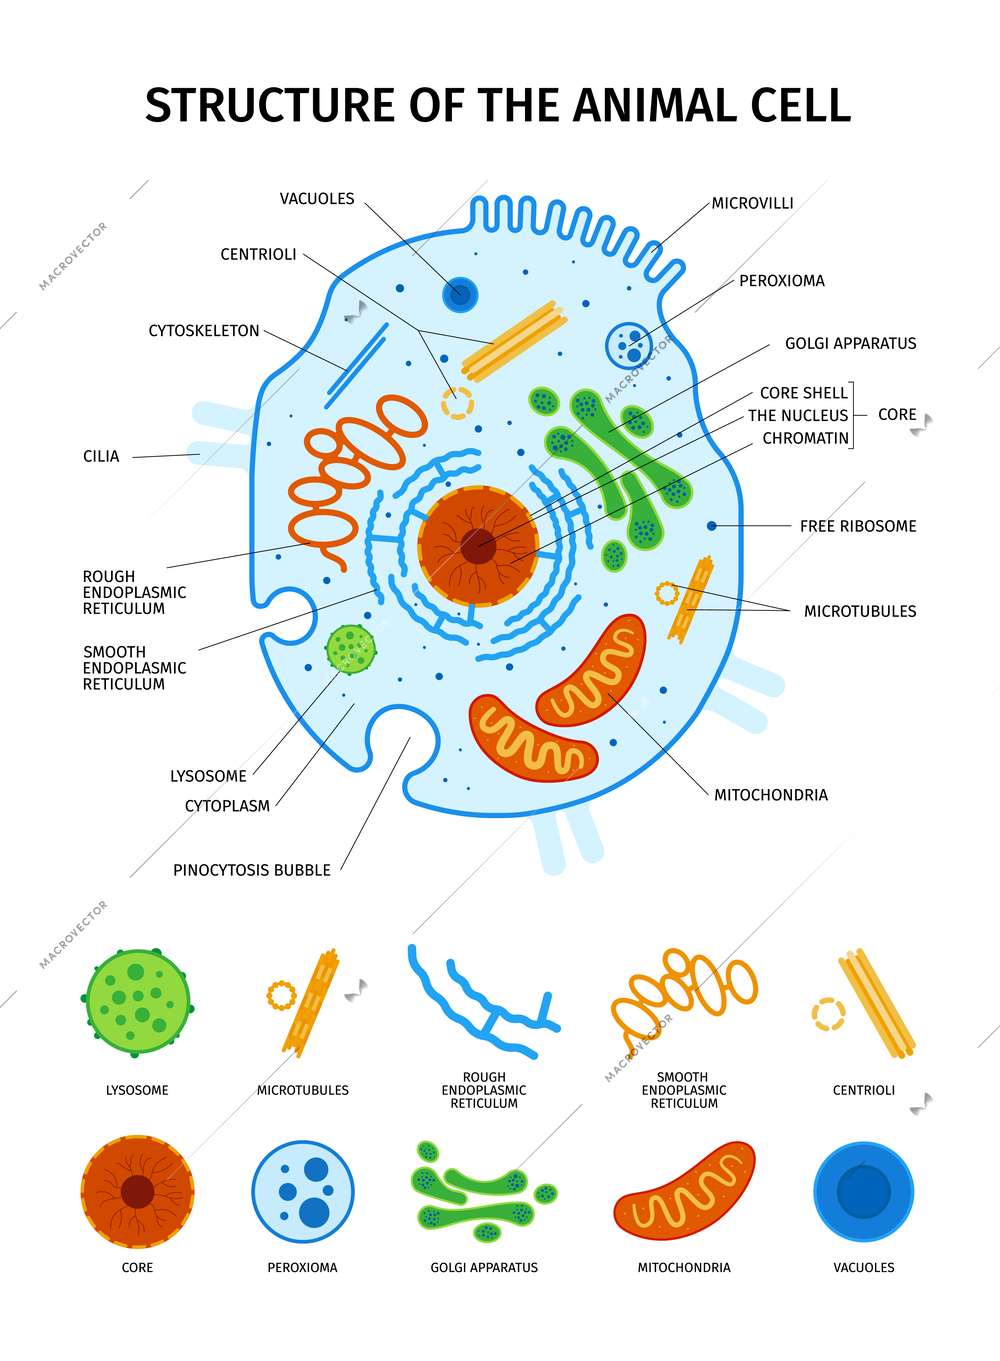 Cell anatomy set with isolated icons of animal cell essential elements with overview and text captions vector illustration